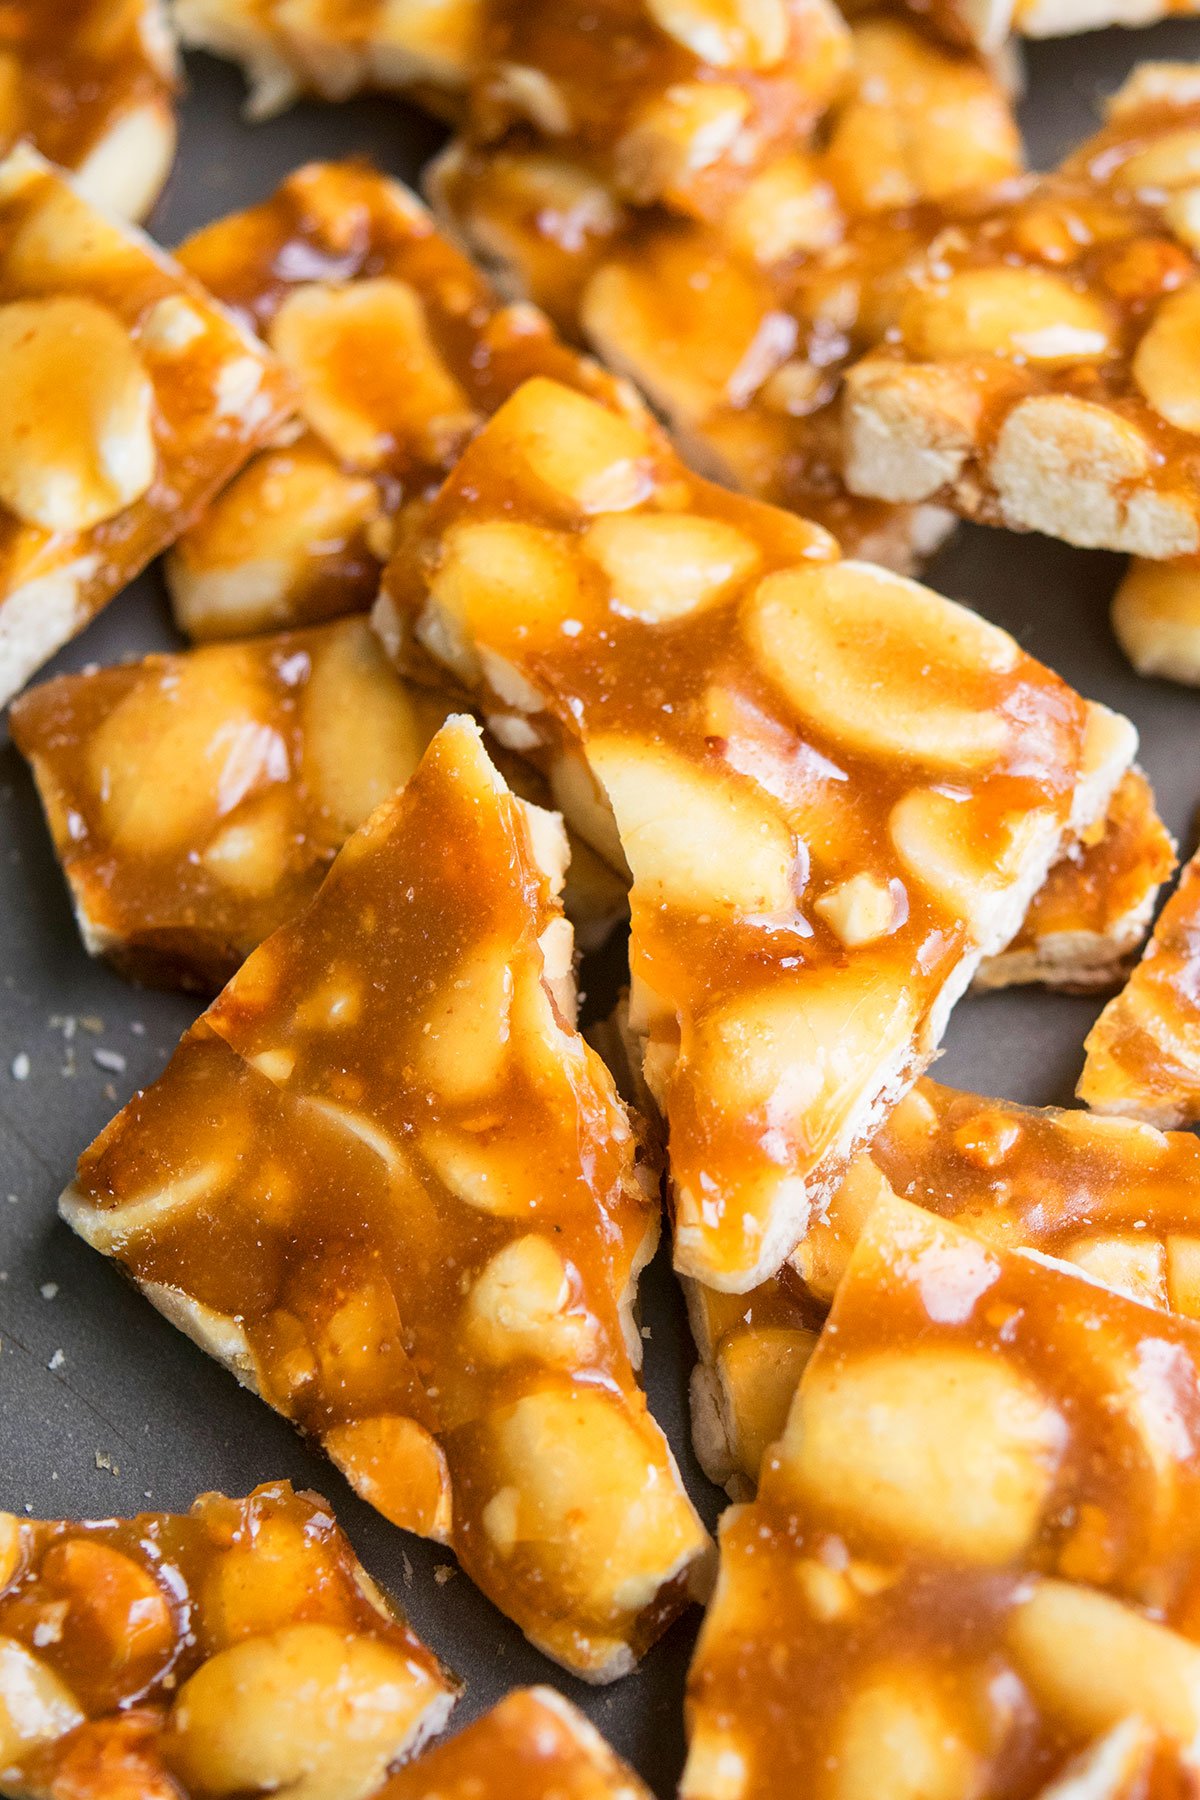 Easy Peanut Brittle Homemade in Microwave on Metal Tray.